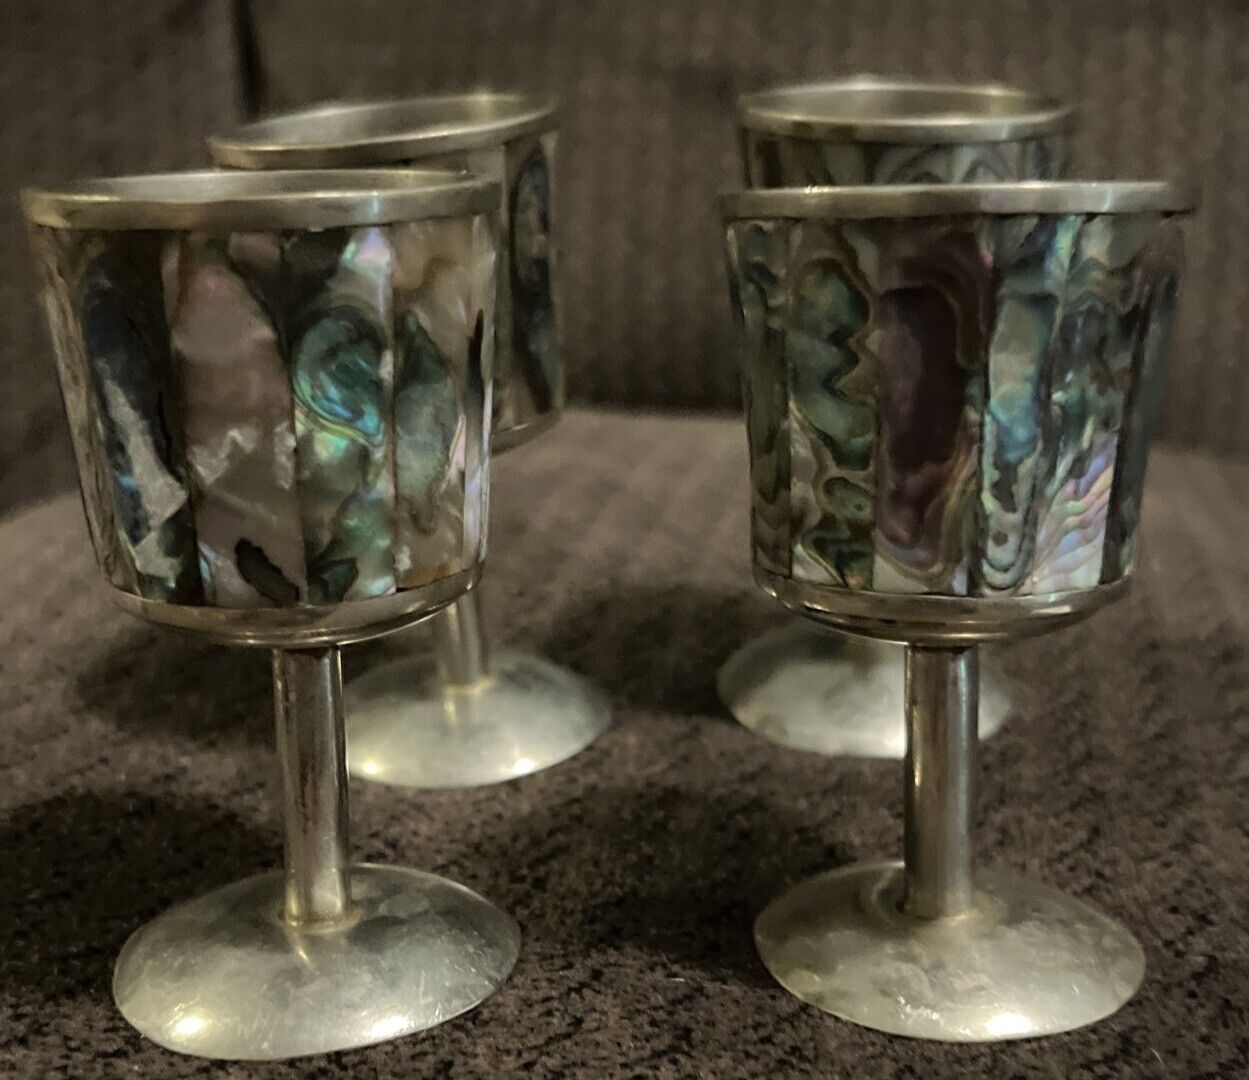 Vintage MEXICAN ABALONE & ALPACA SILVER TEQUILA SET - 4 SHOT GLASSES